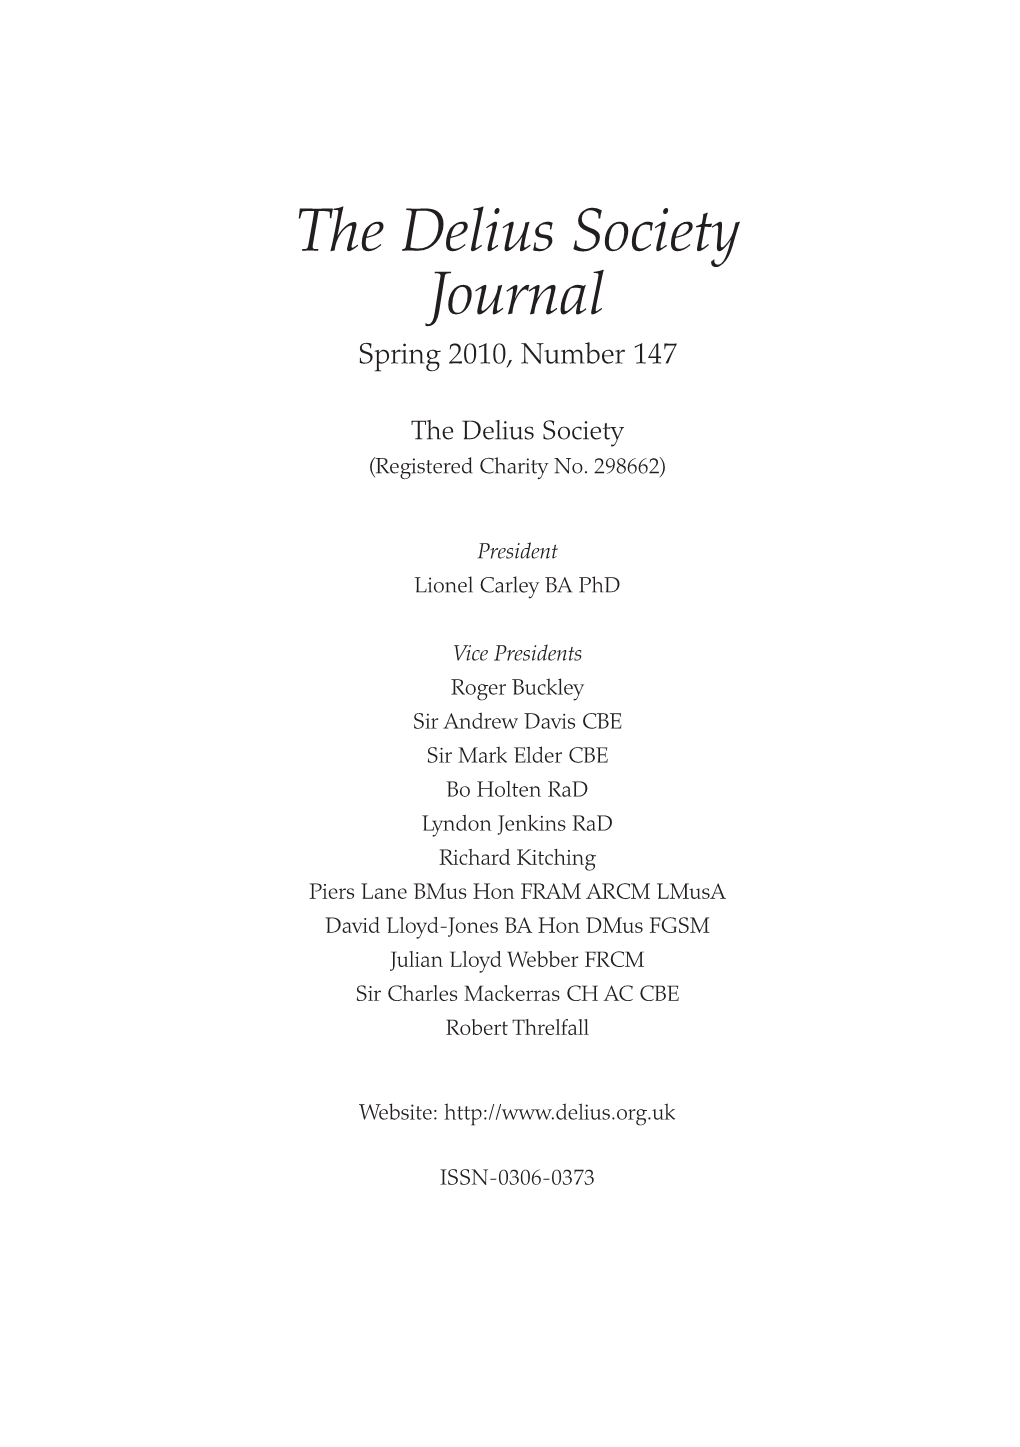 The Delius Society Journal Spring 2010, Number 147